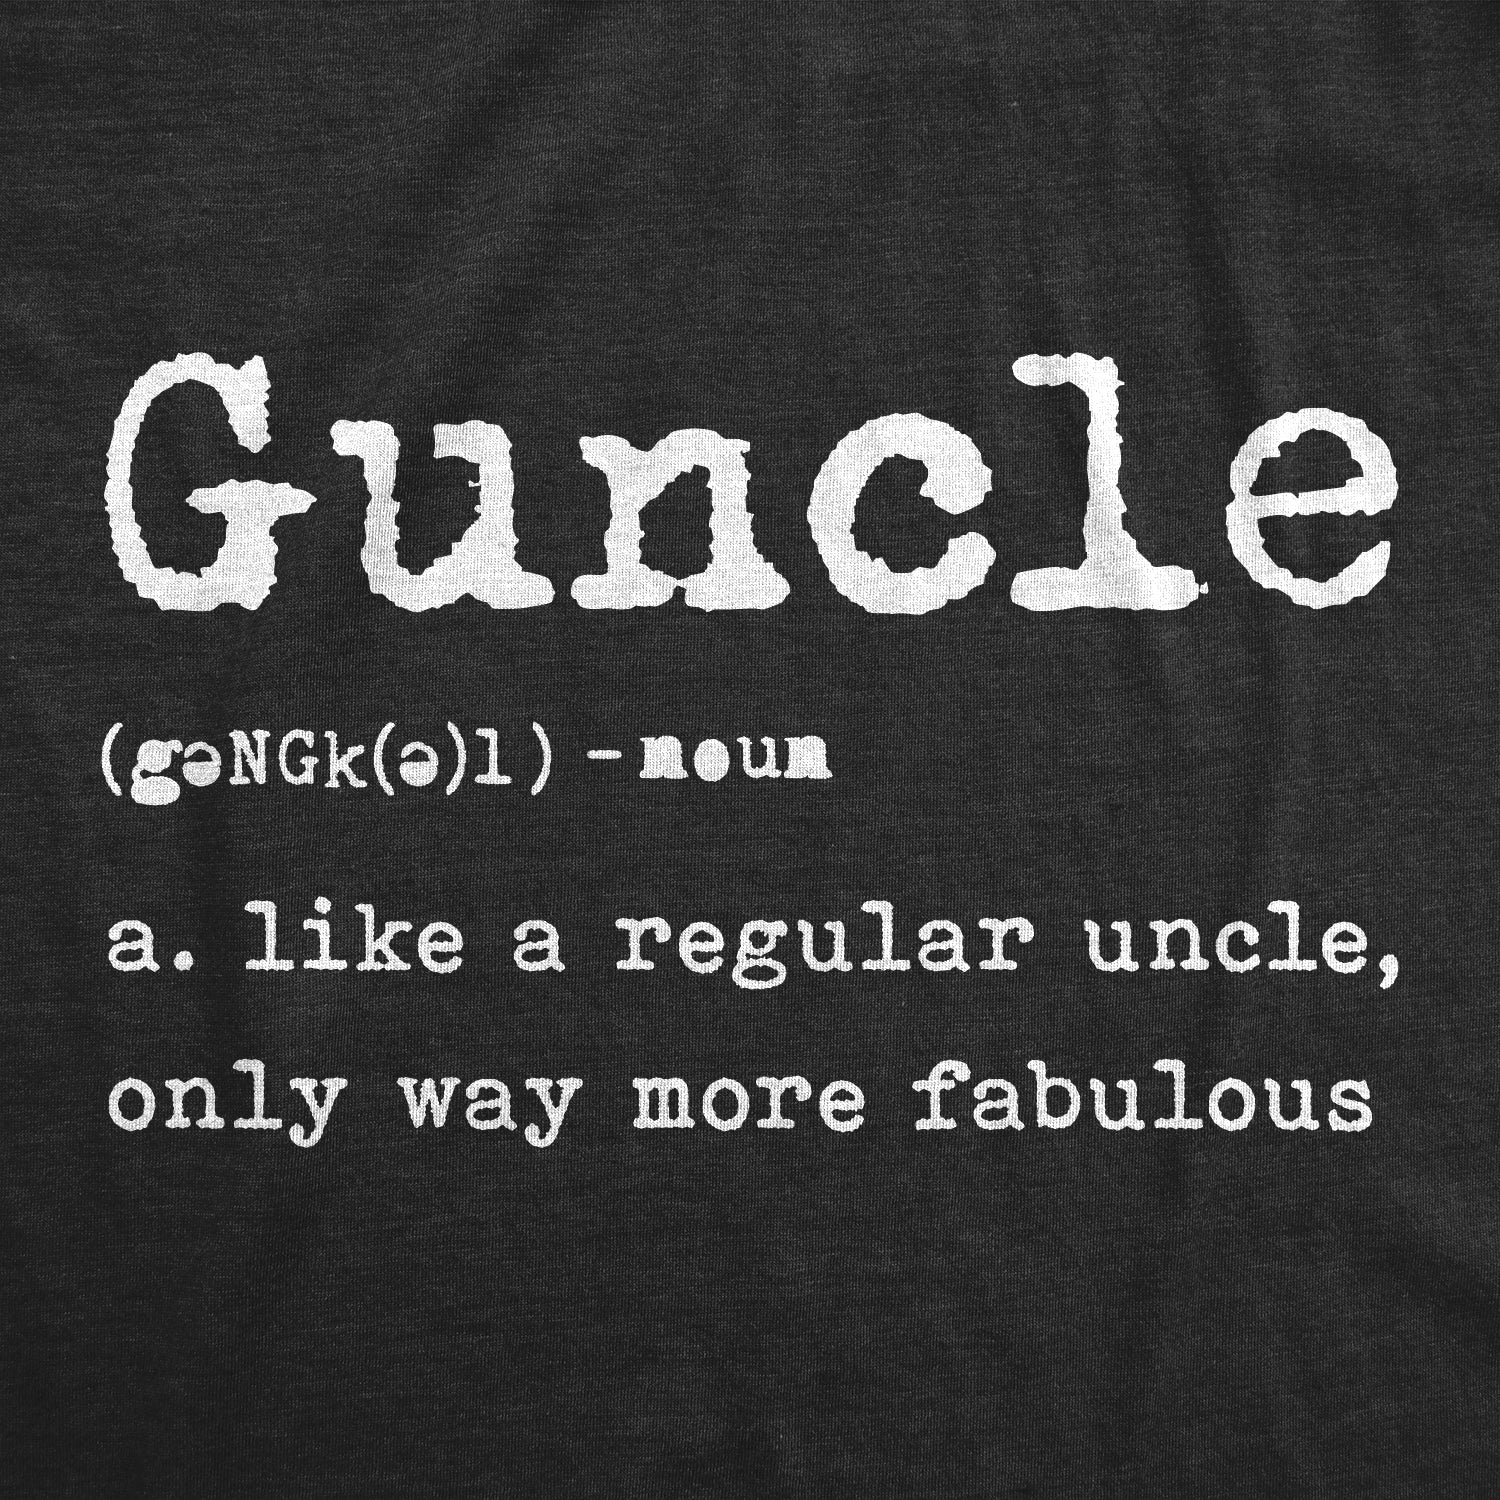 Funny Heather Black - Guncle Guncle Definition Mens T Shirt Nerdy Uncle Tee